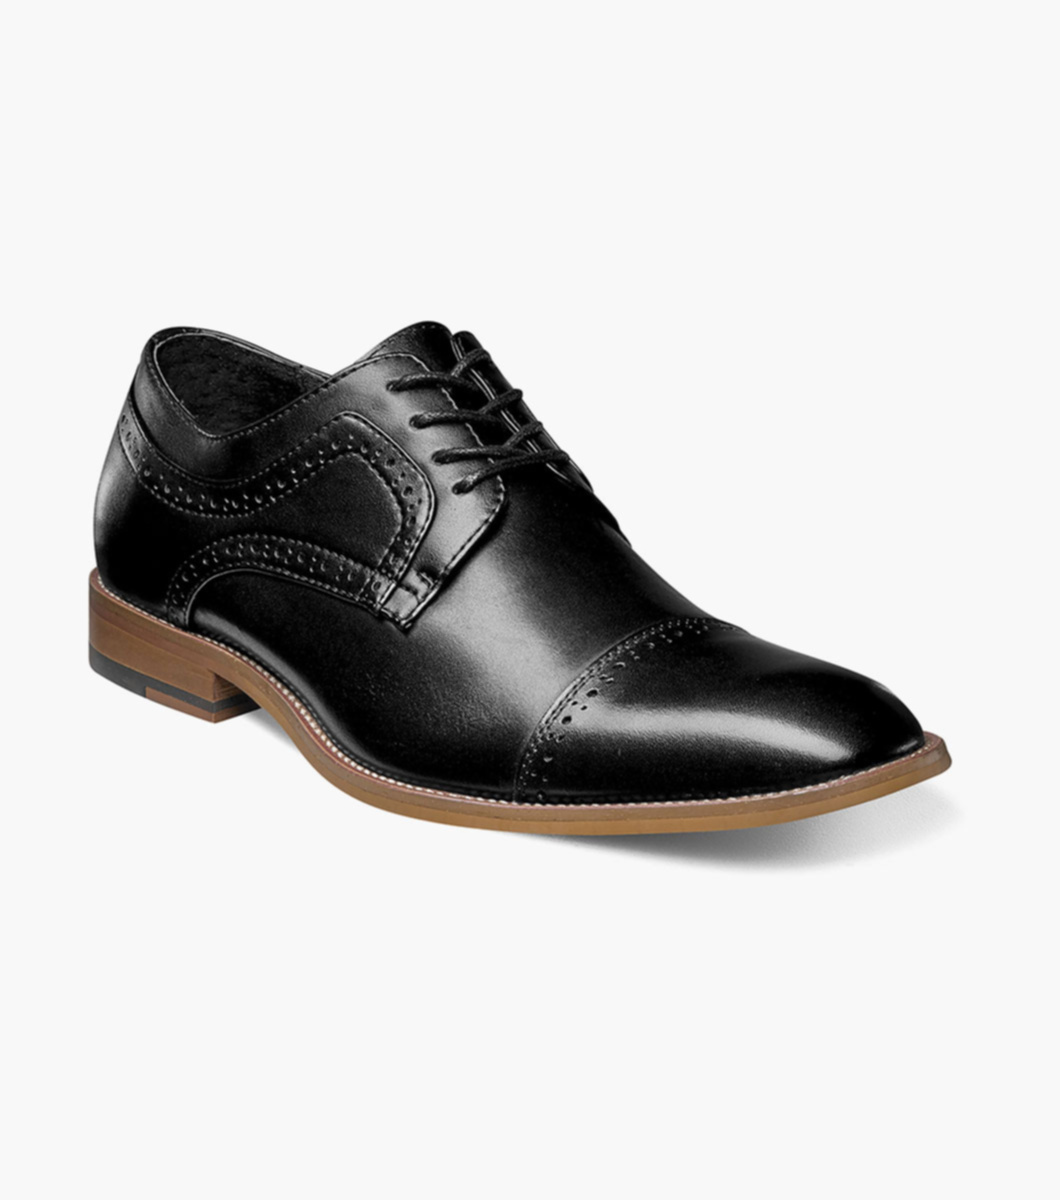 WILLY ADAMS Oxfords-Shoes Mens Leather Black